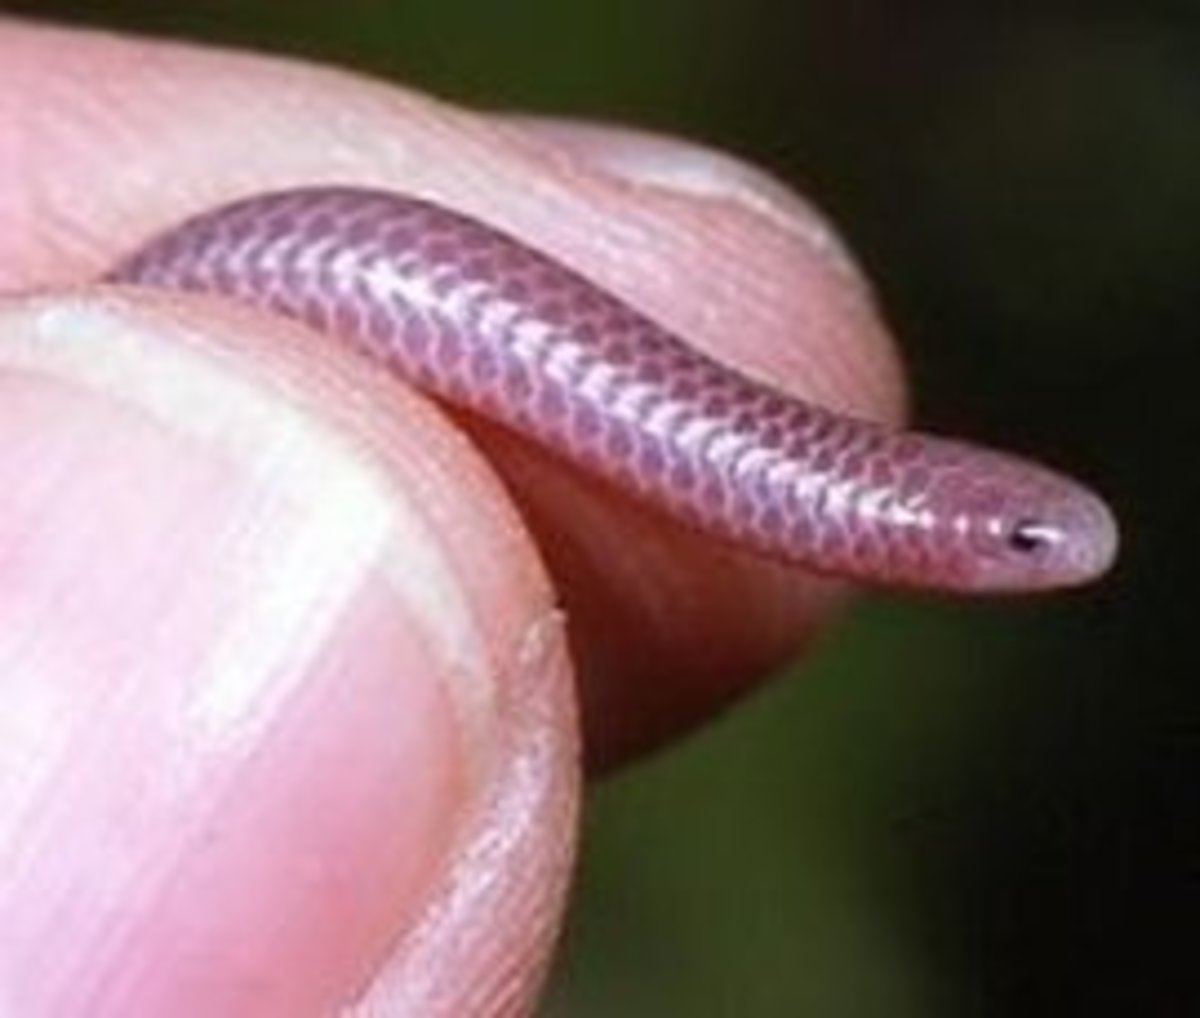 World's smallest: The Barbados Threadsnake